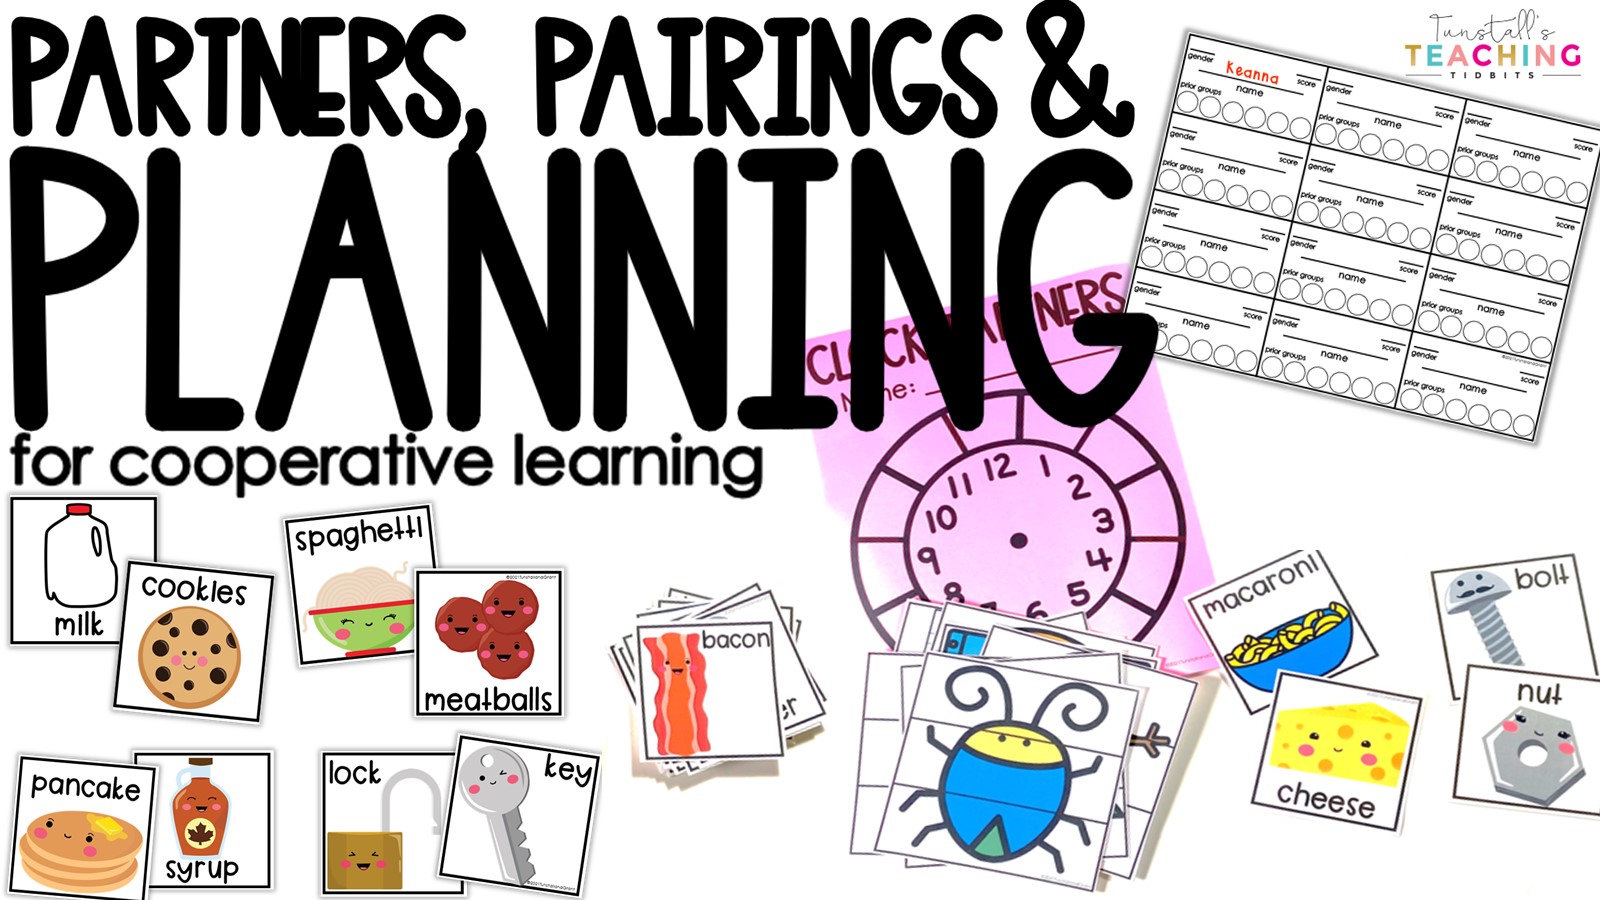 Partners, Group Pairings, and Planning for Cooperative Learning